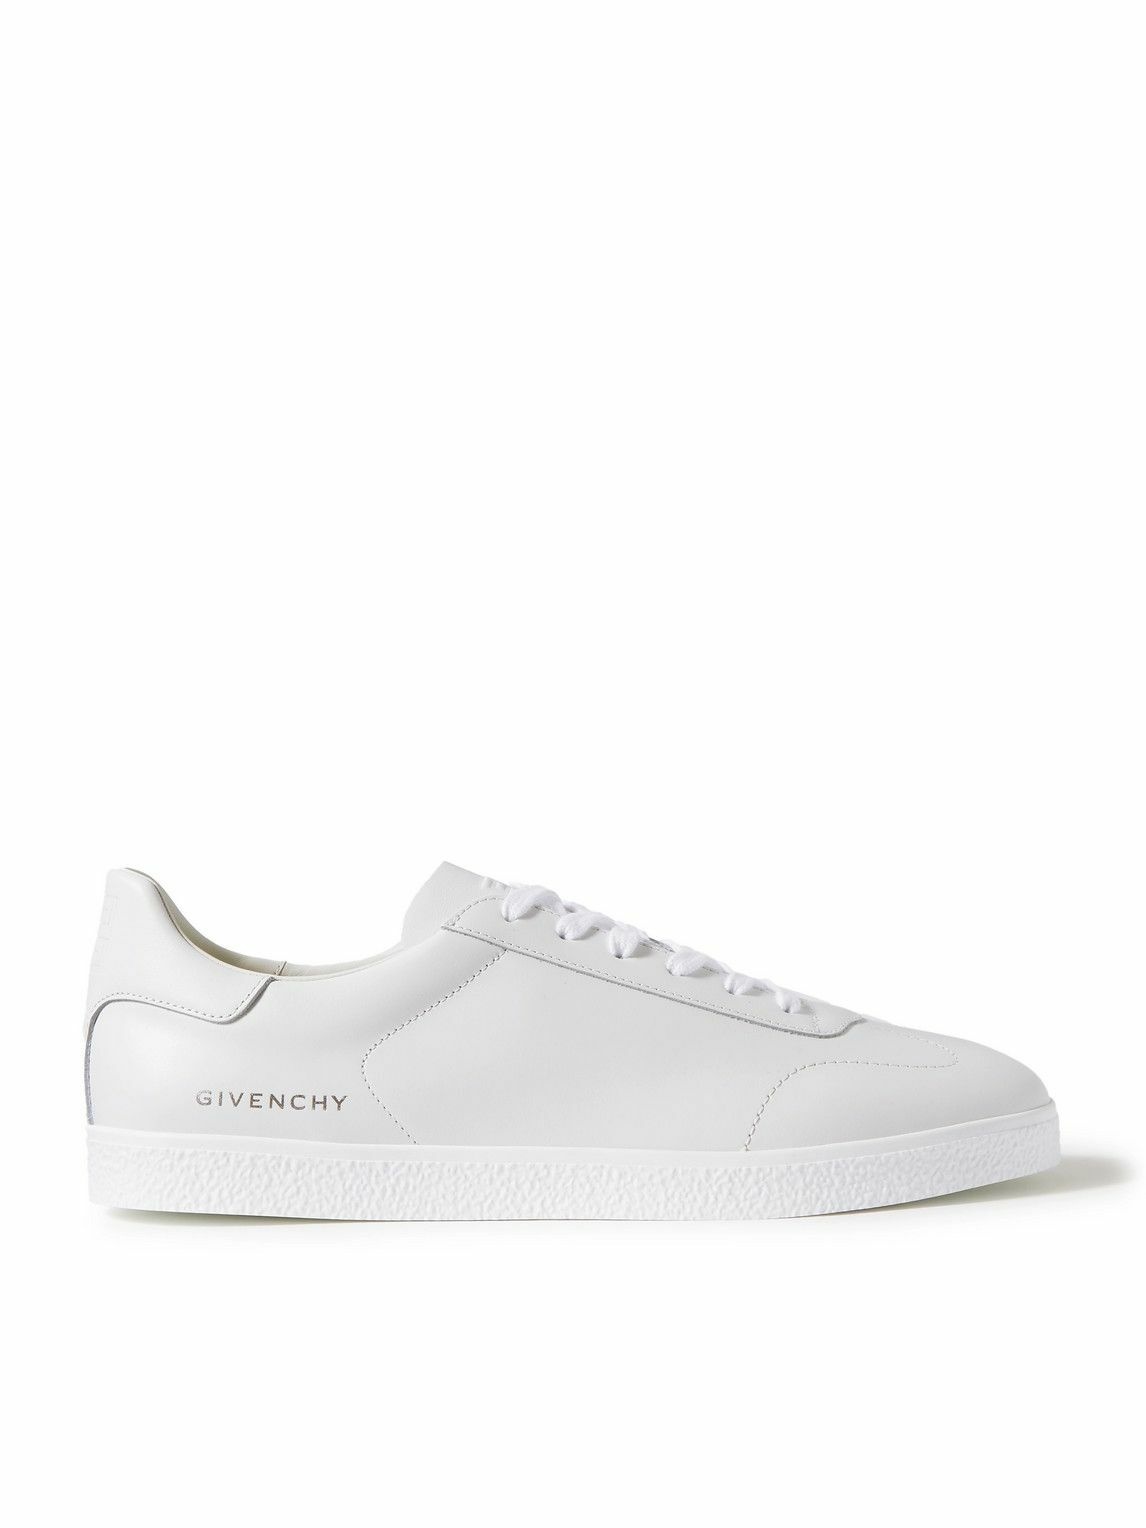 Photo: Givenchy - Town Leather Sneakers - White